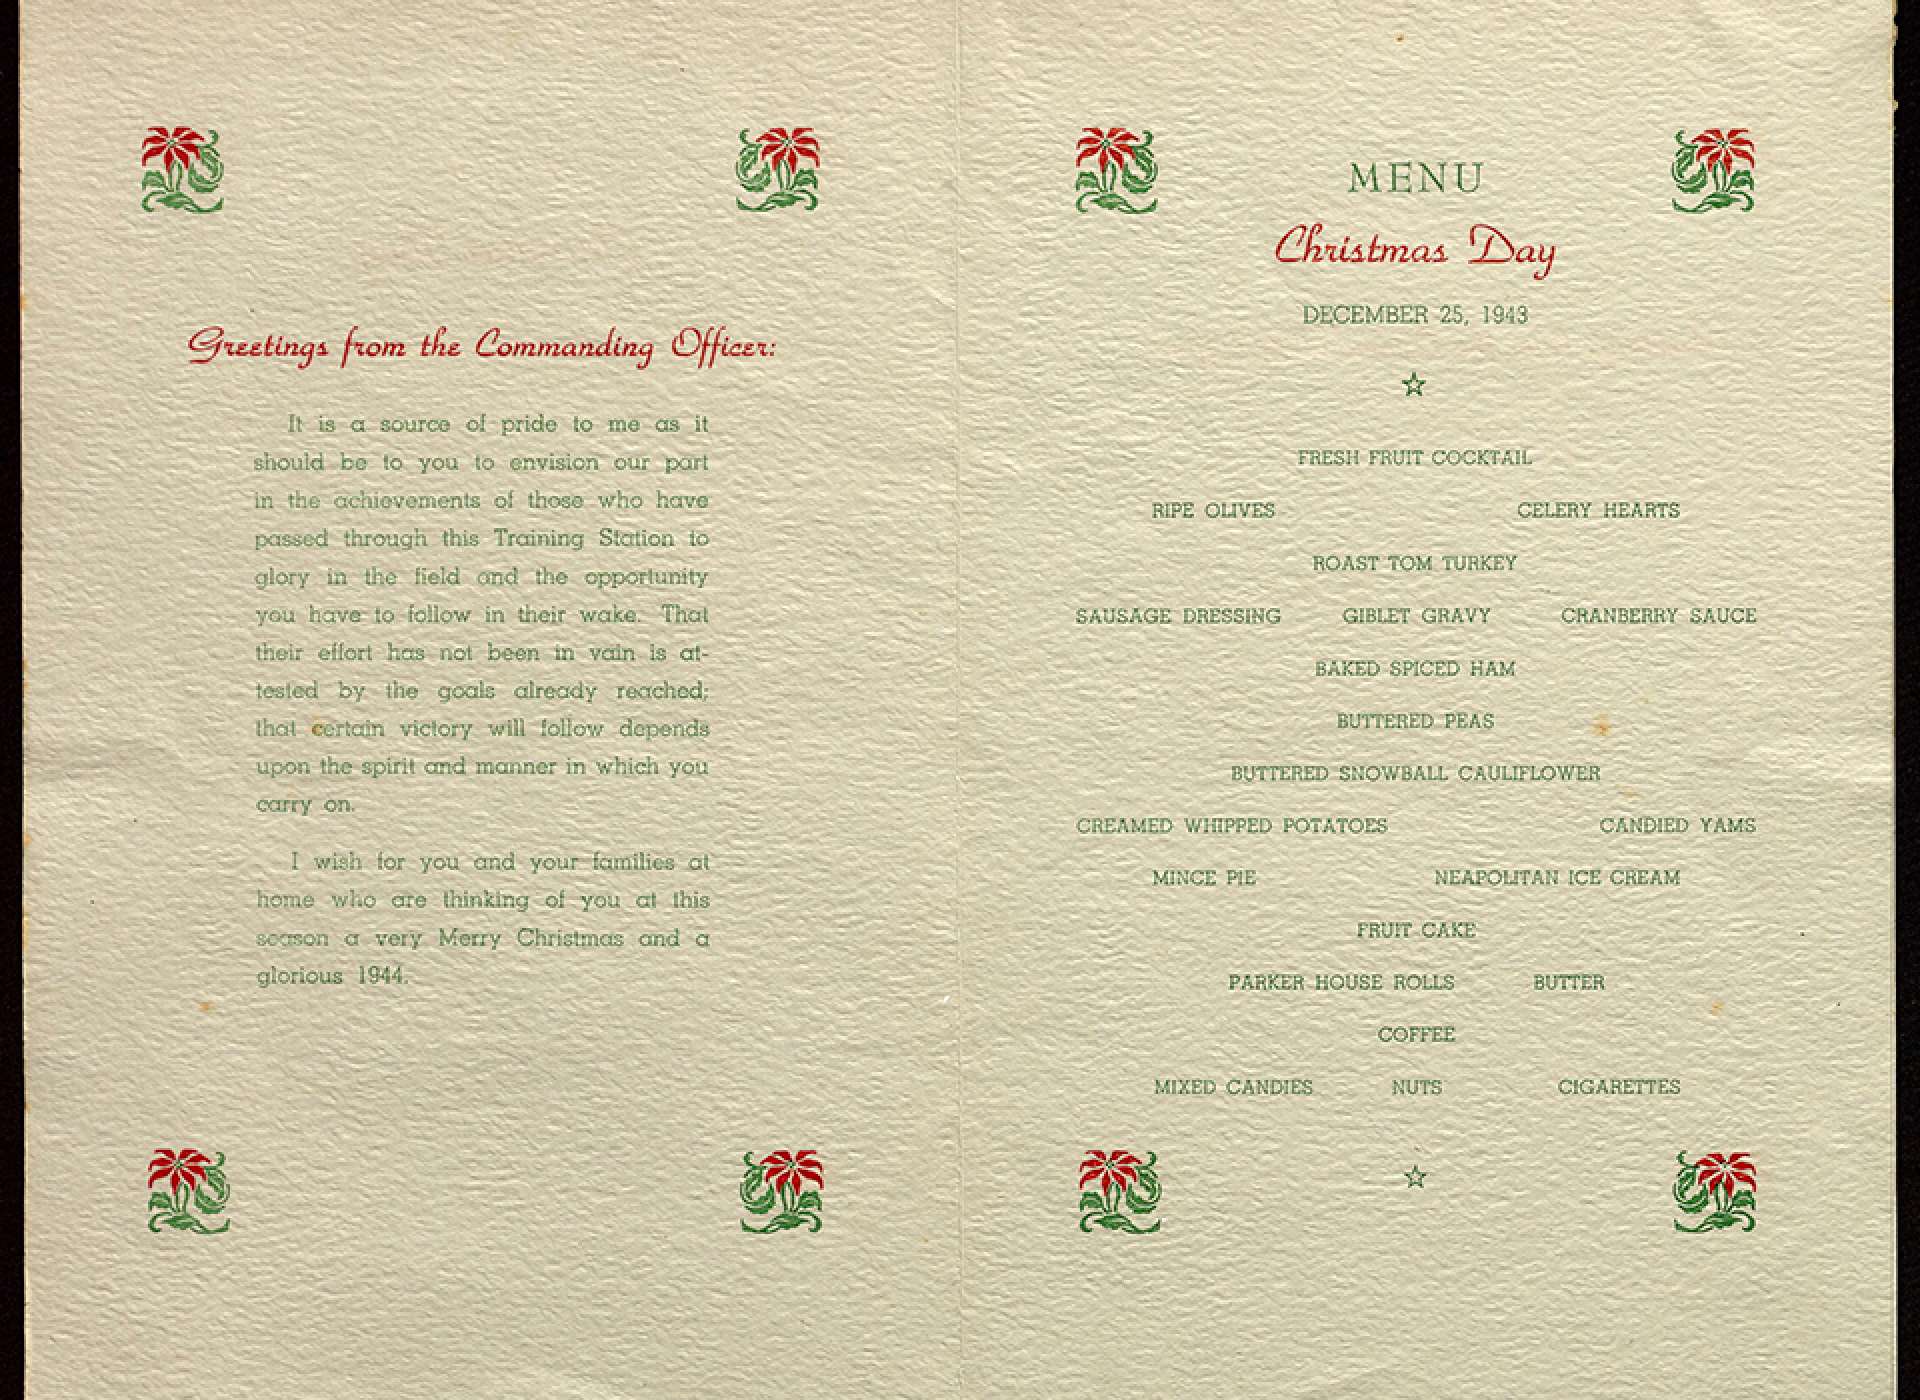 1943 Christmas Menu from the US Naval Training Station, San Diego. Gift of Suzanne Davis Gillespie, 2008.215.010